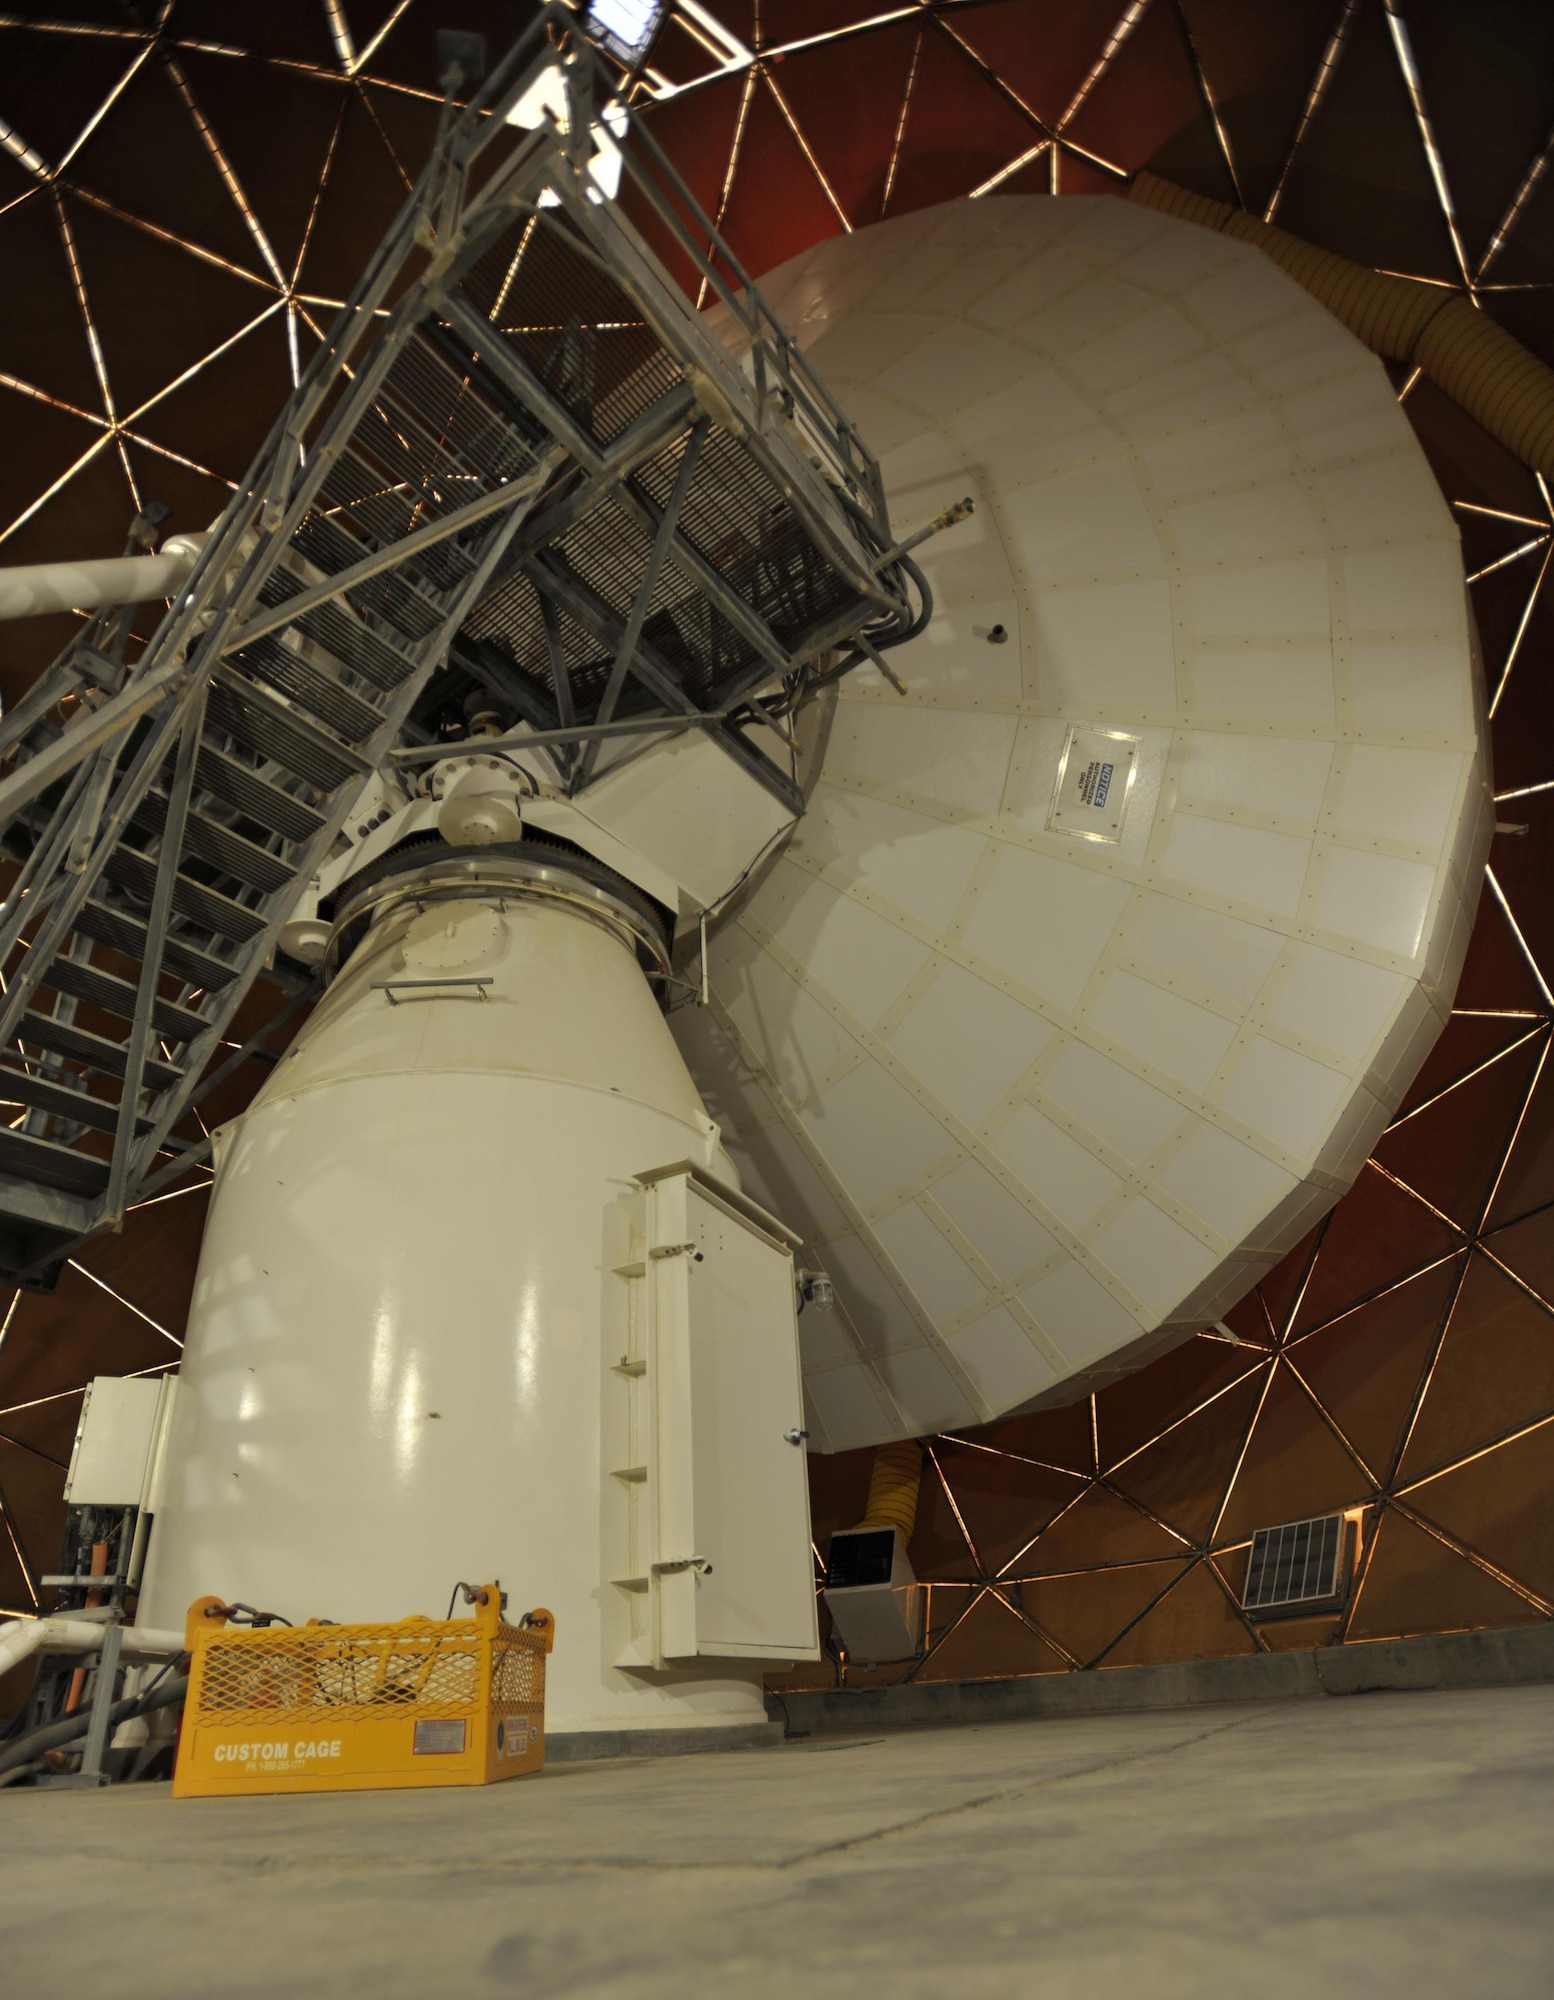 The Modernized Enterprise Terminal sits inside a Radome at AL Udeid Air Base, Qatar, Jan. 21, 2016. The 379th Expeditionary Communication Squadron recently completed an upgrade to their Army, Navy Ground Satellite Communications system which will enable better communications for warfighters. (U.S. Air Force photo by Master Sgt. Joshua Strang)